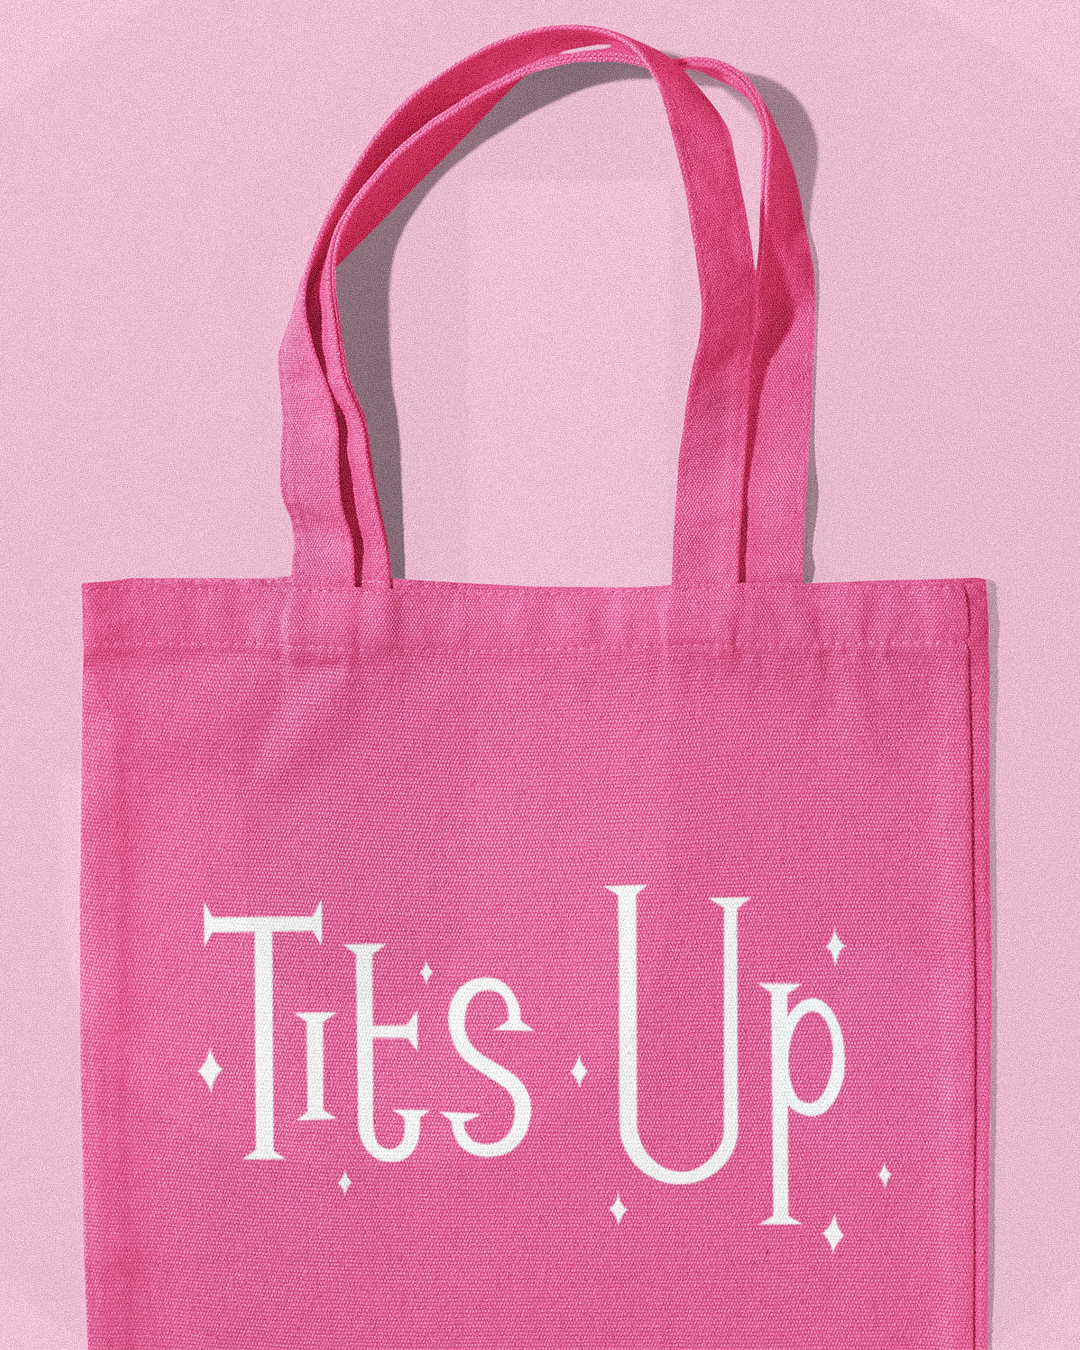 Tits Up Tote Bag - The Marvelous Mrs Maisel Inspired Tote Bag - Mrs Maisel Tits Up Tote Bag - Tits Up Mrs Maisel Inspired Tote Bag